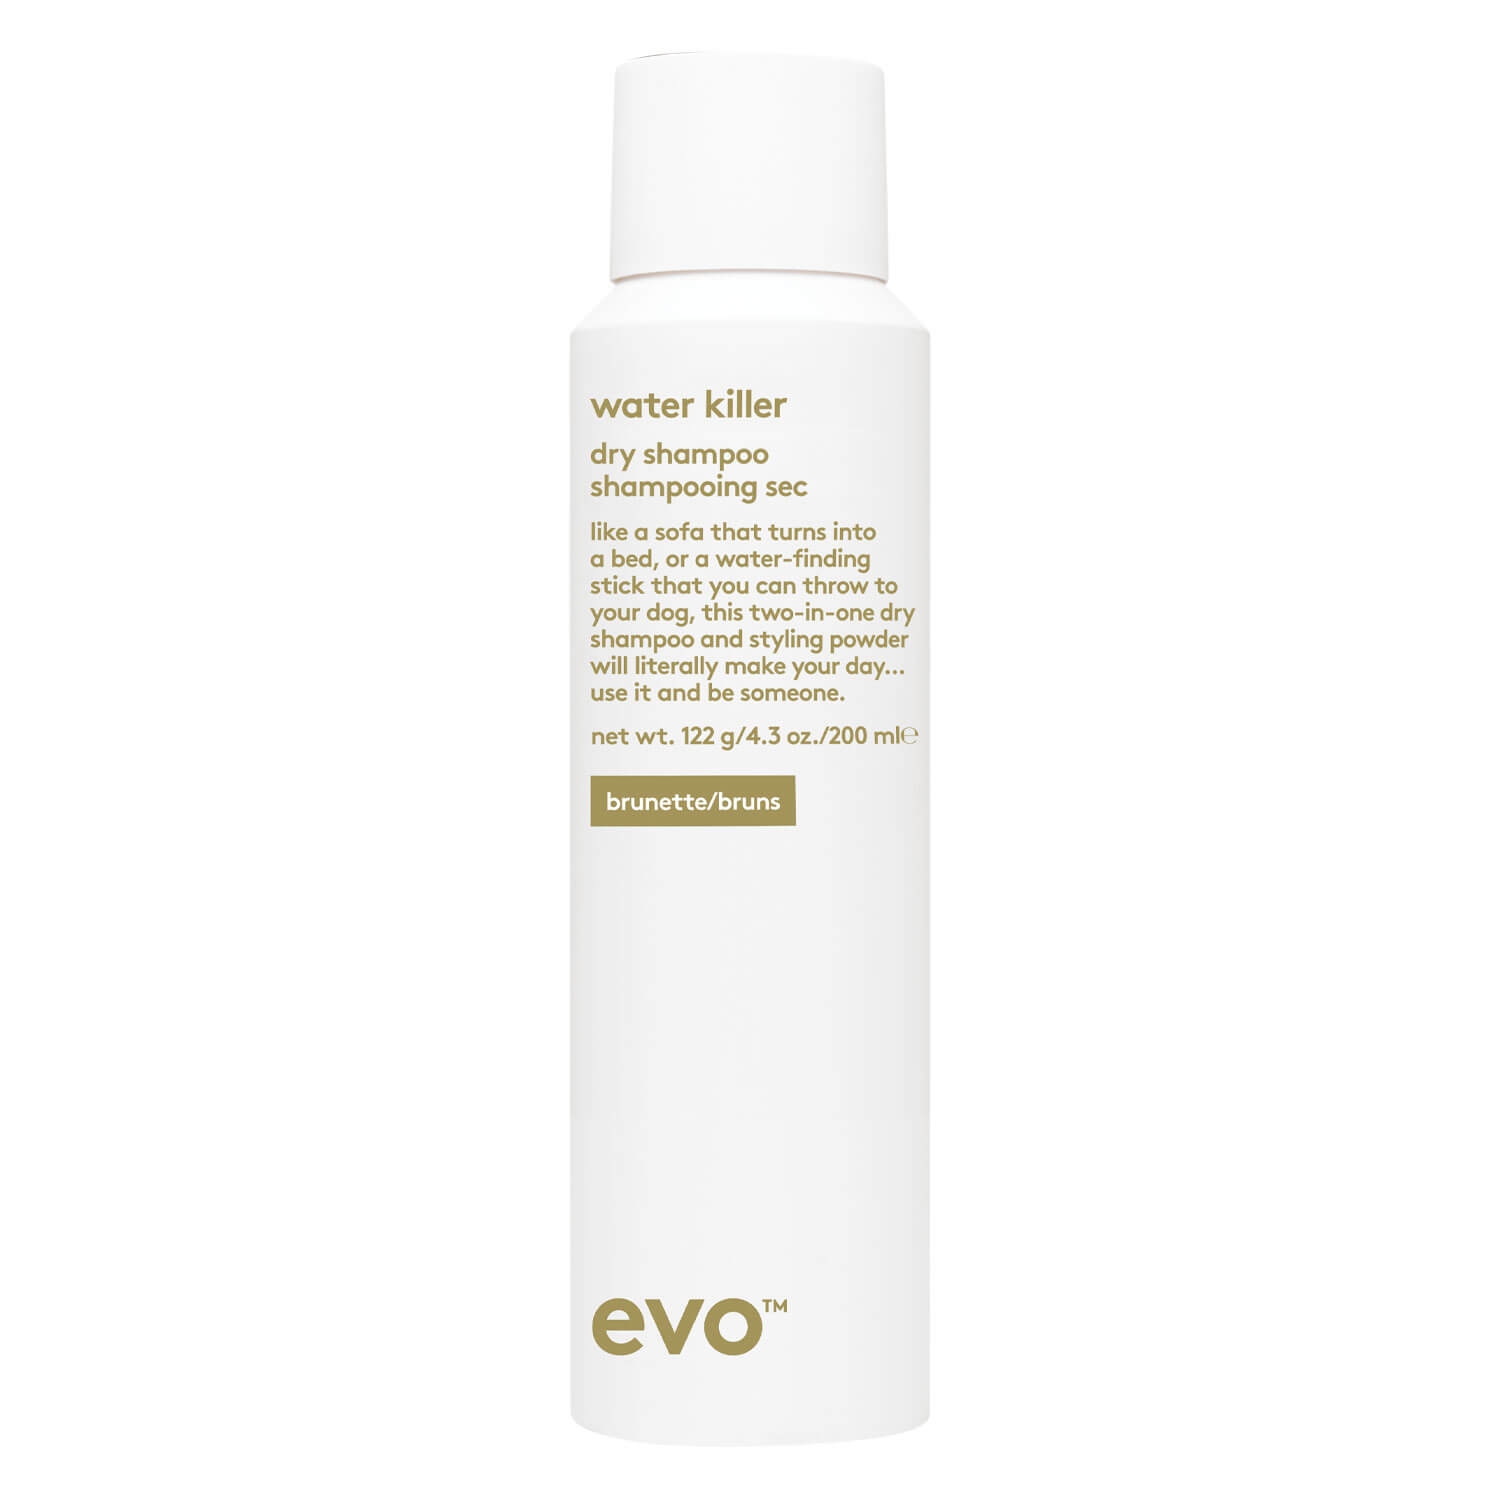 Product image from evo style - water killer dry shampoo brunette